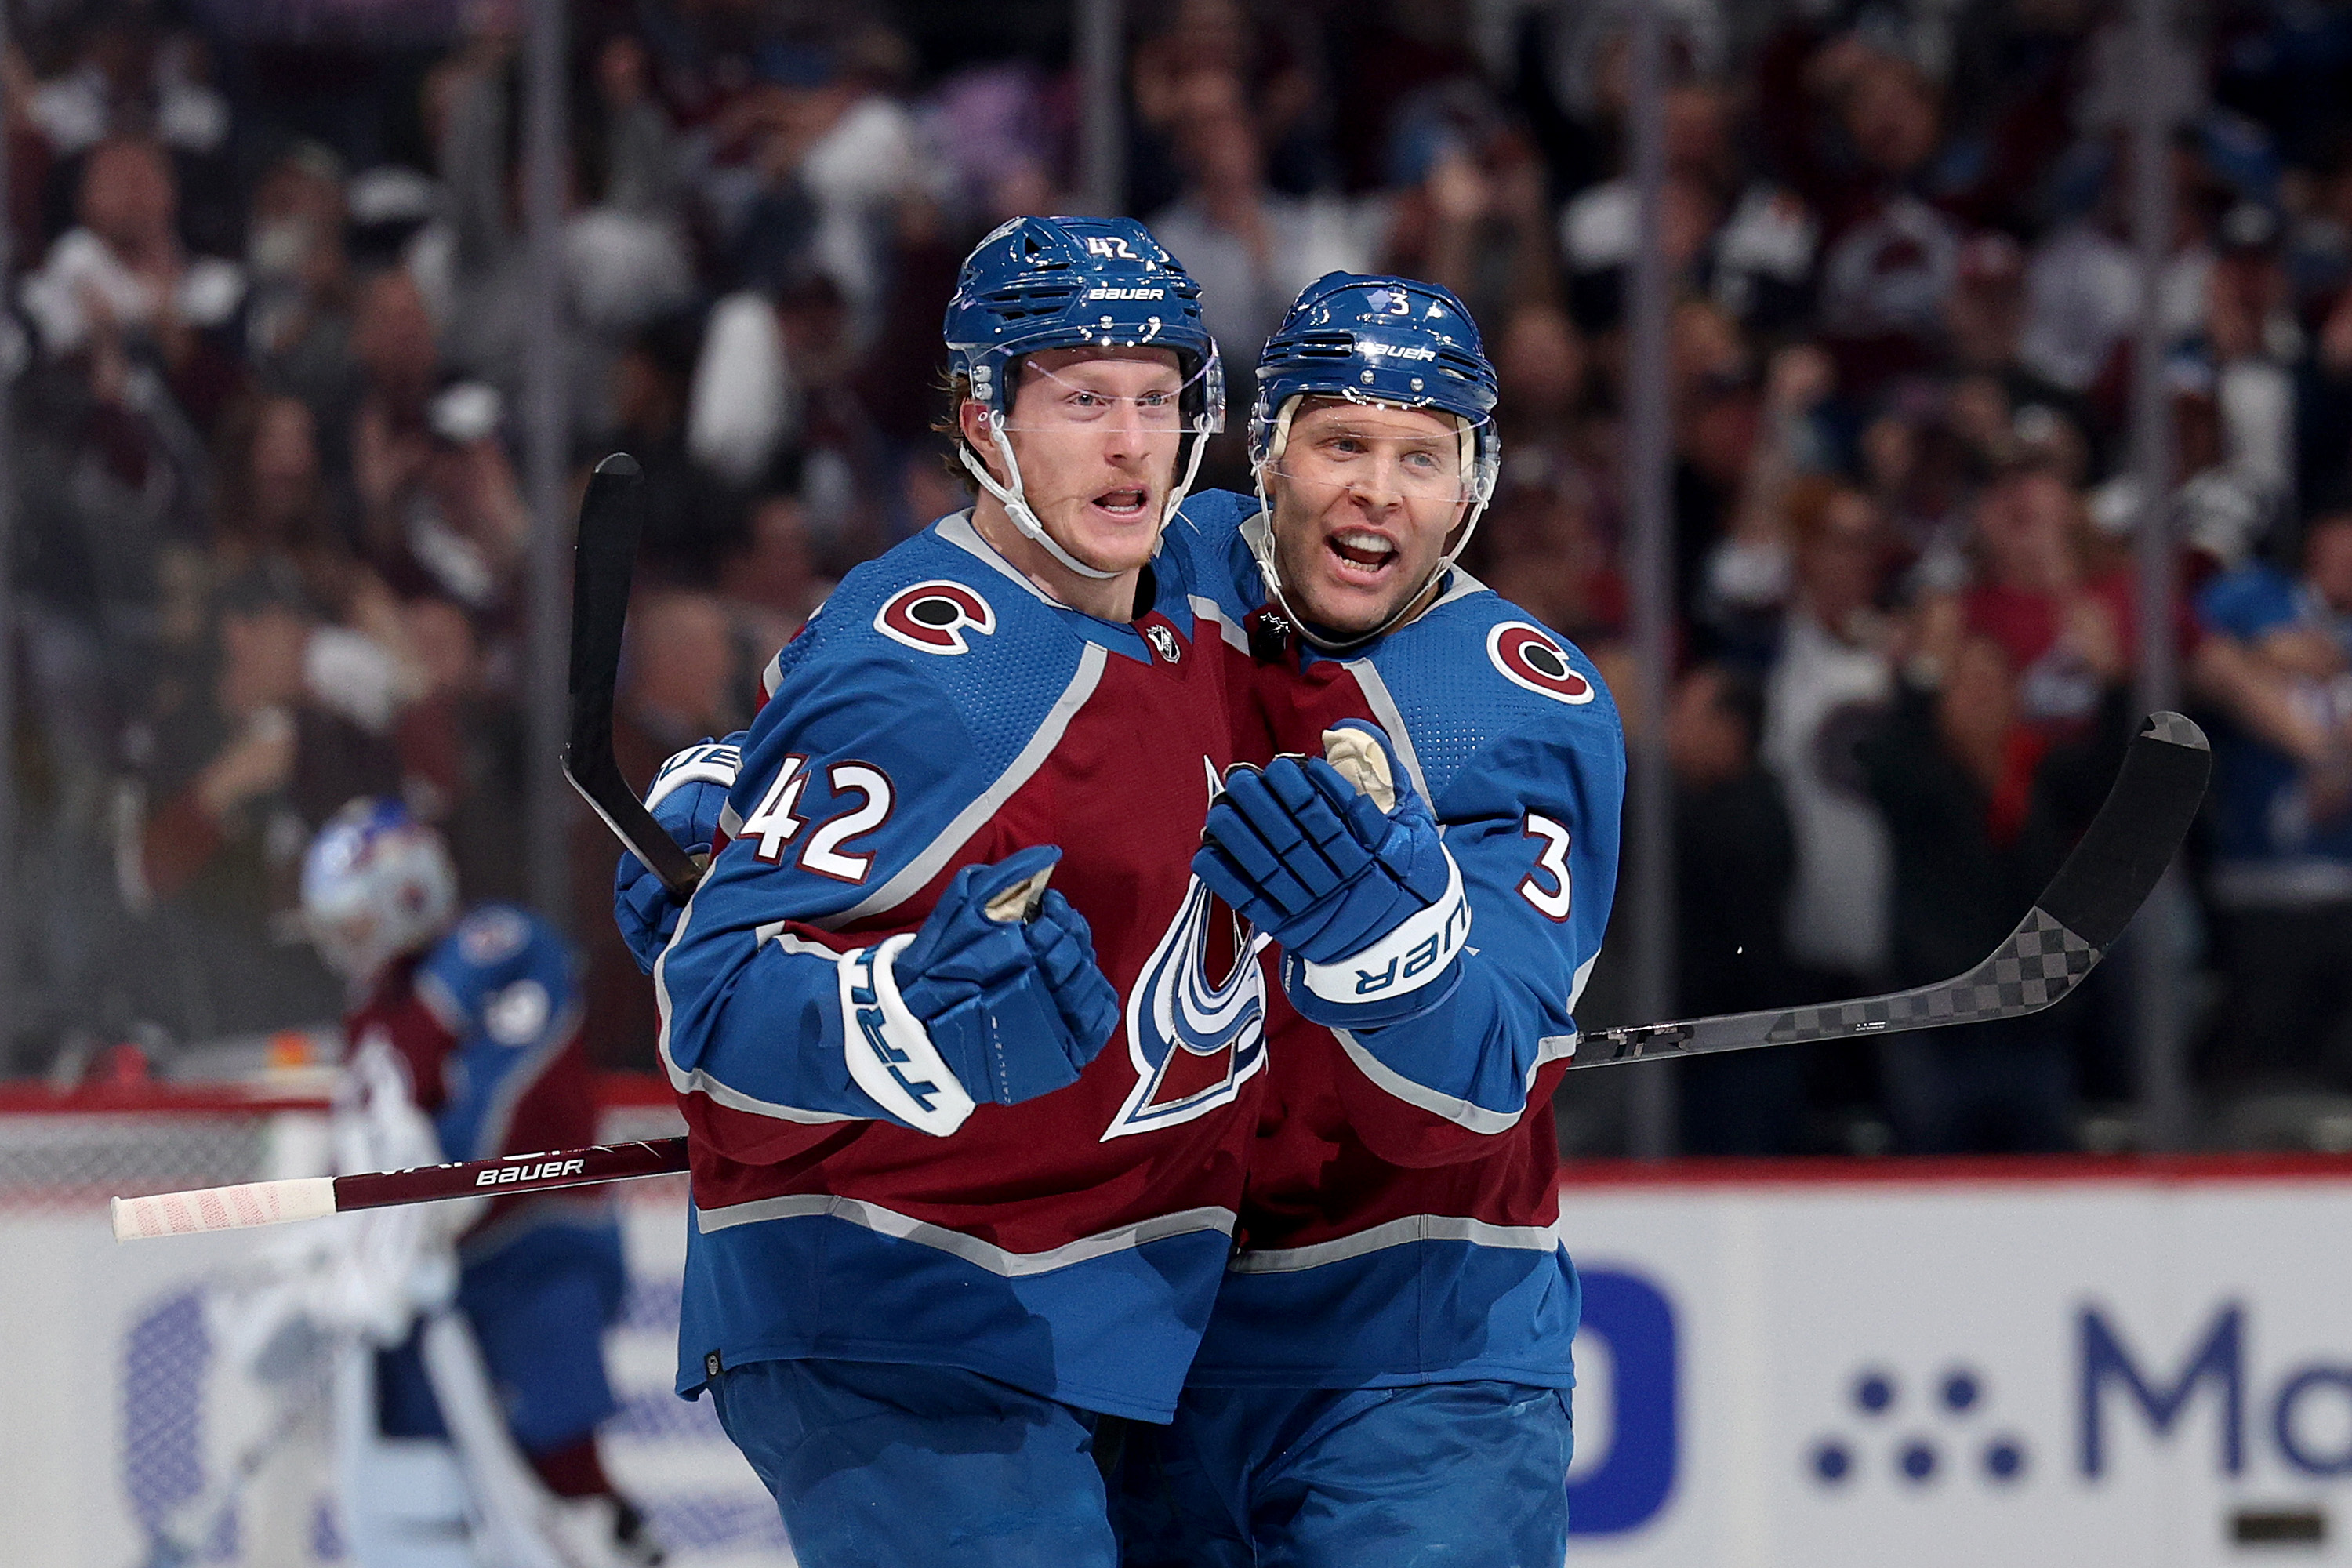 Nazem Kadri leads Avalanche to Game 2 win over Oilers